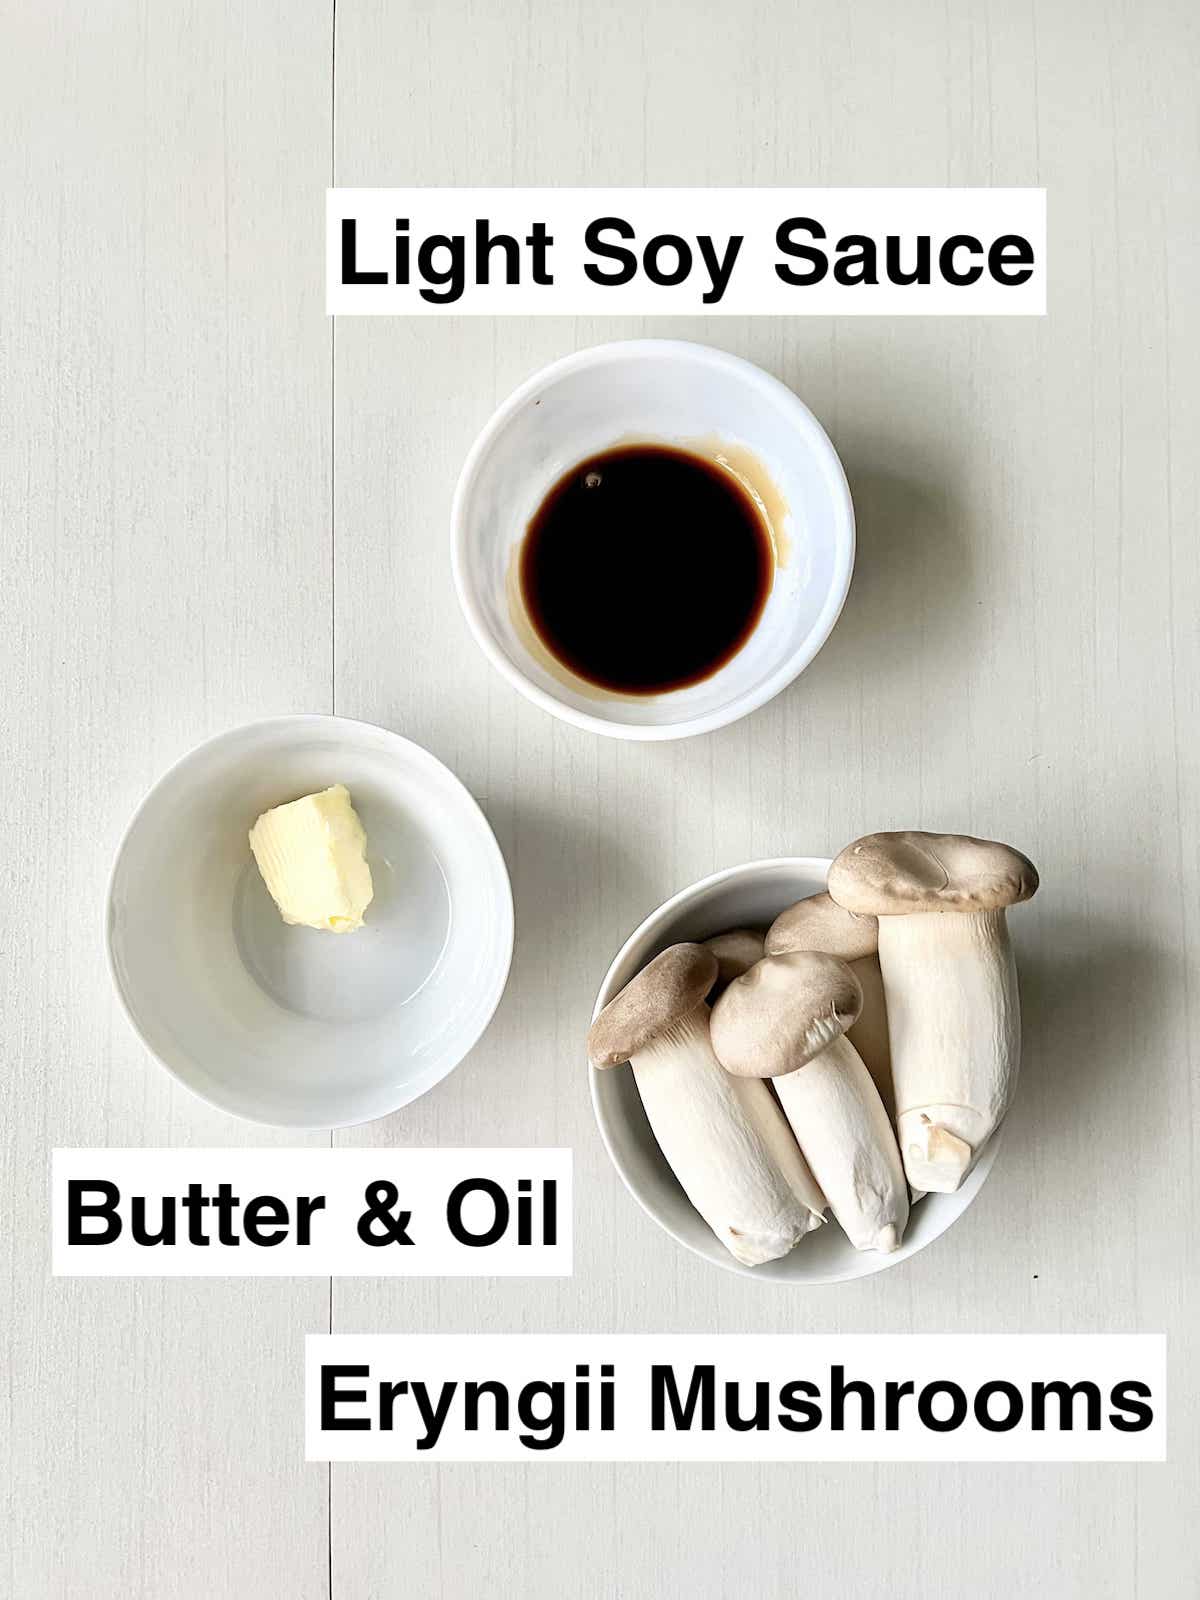 A bowl of butter, light soy sauce and eryngii mushrooms next to each other.